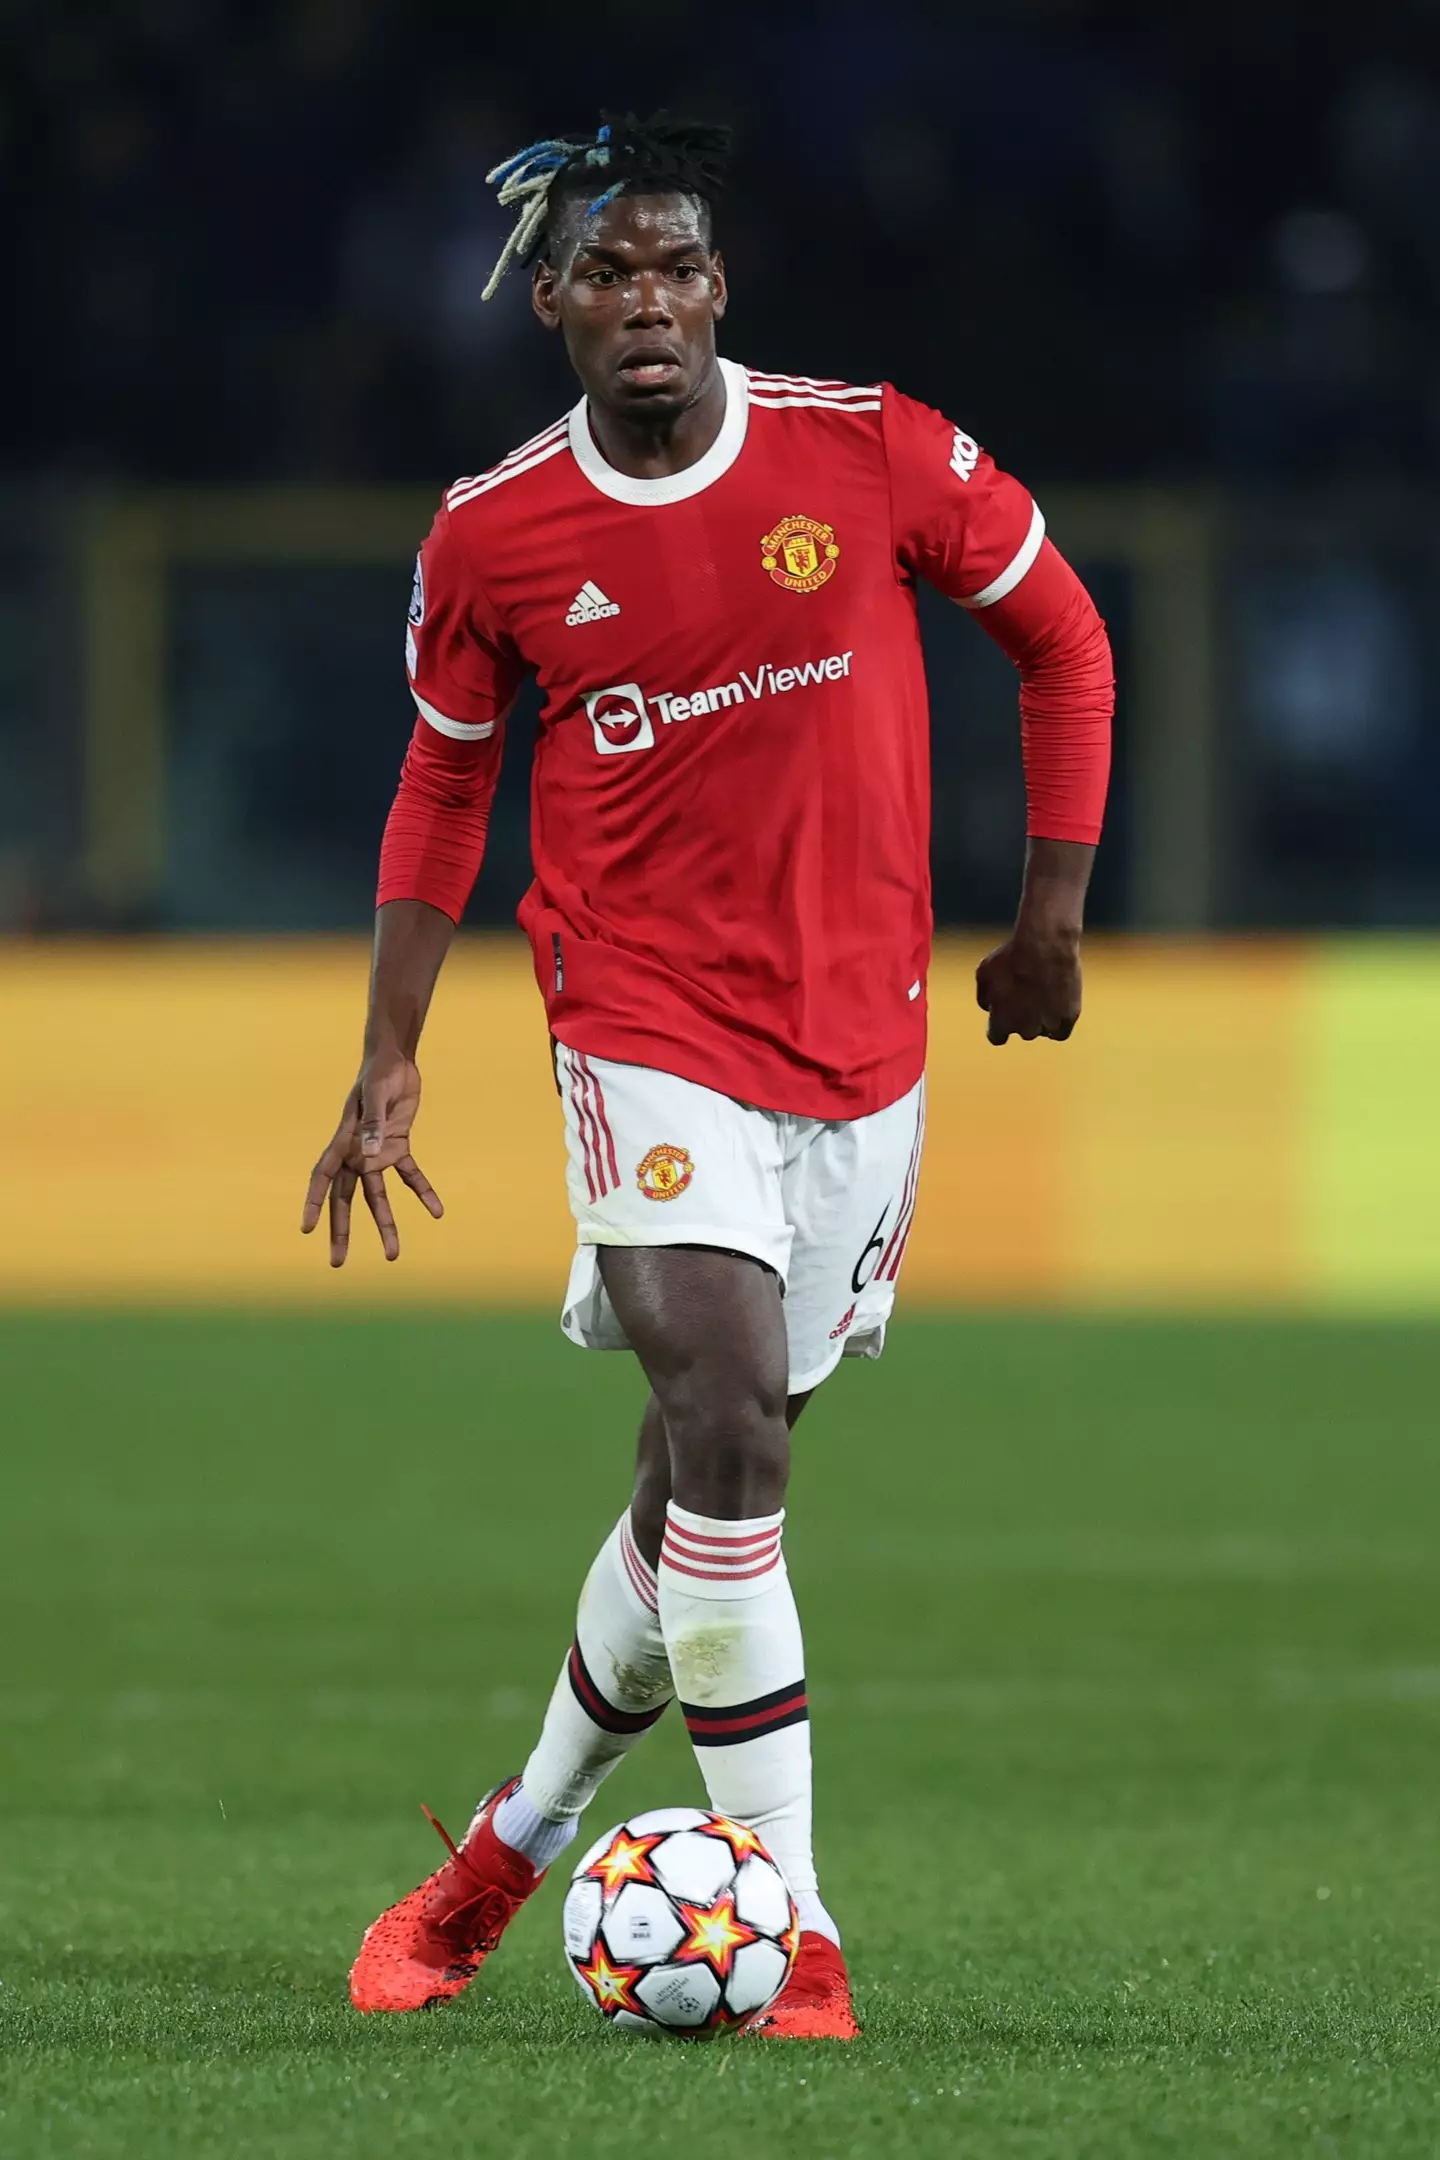 Pogba is expected to leave Manchester United on a free transfer this summer (Image: Alamy)